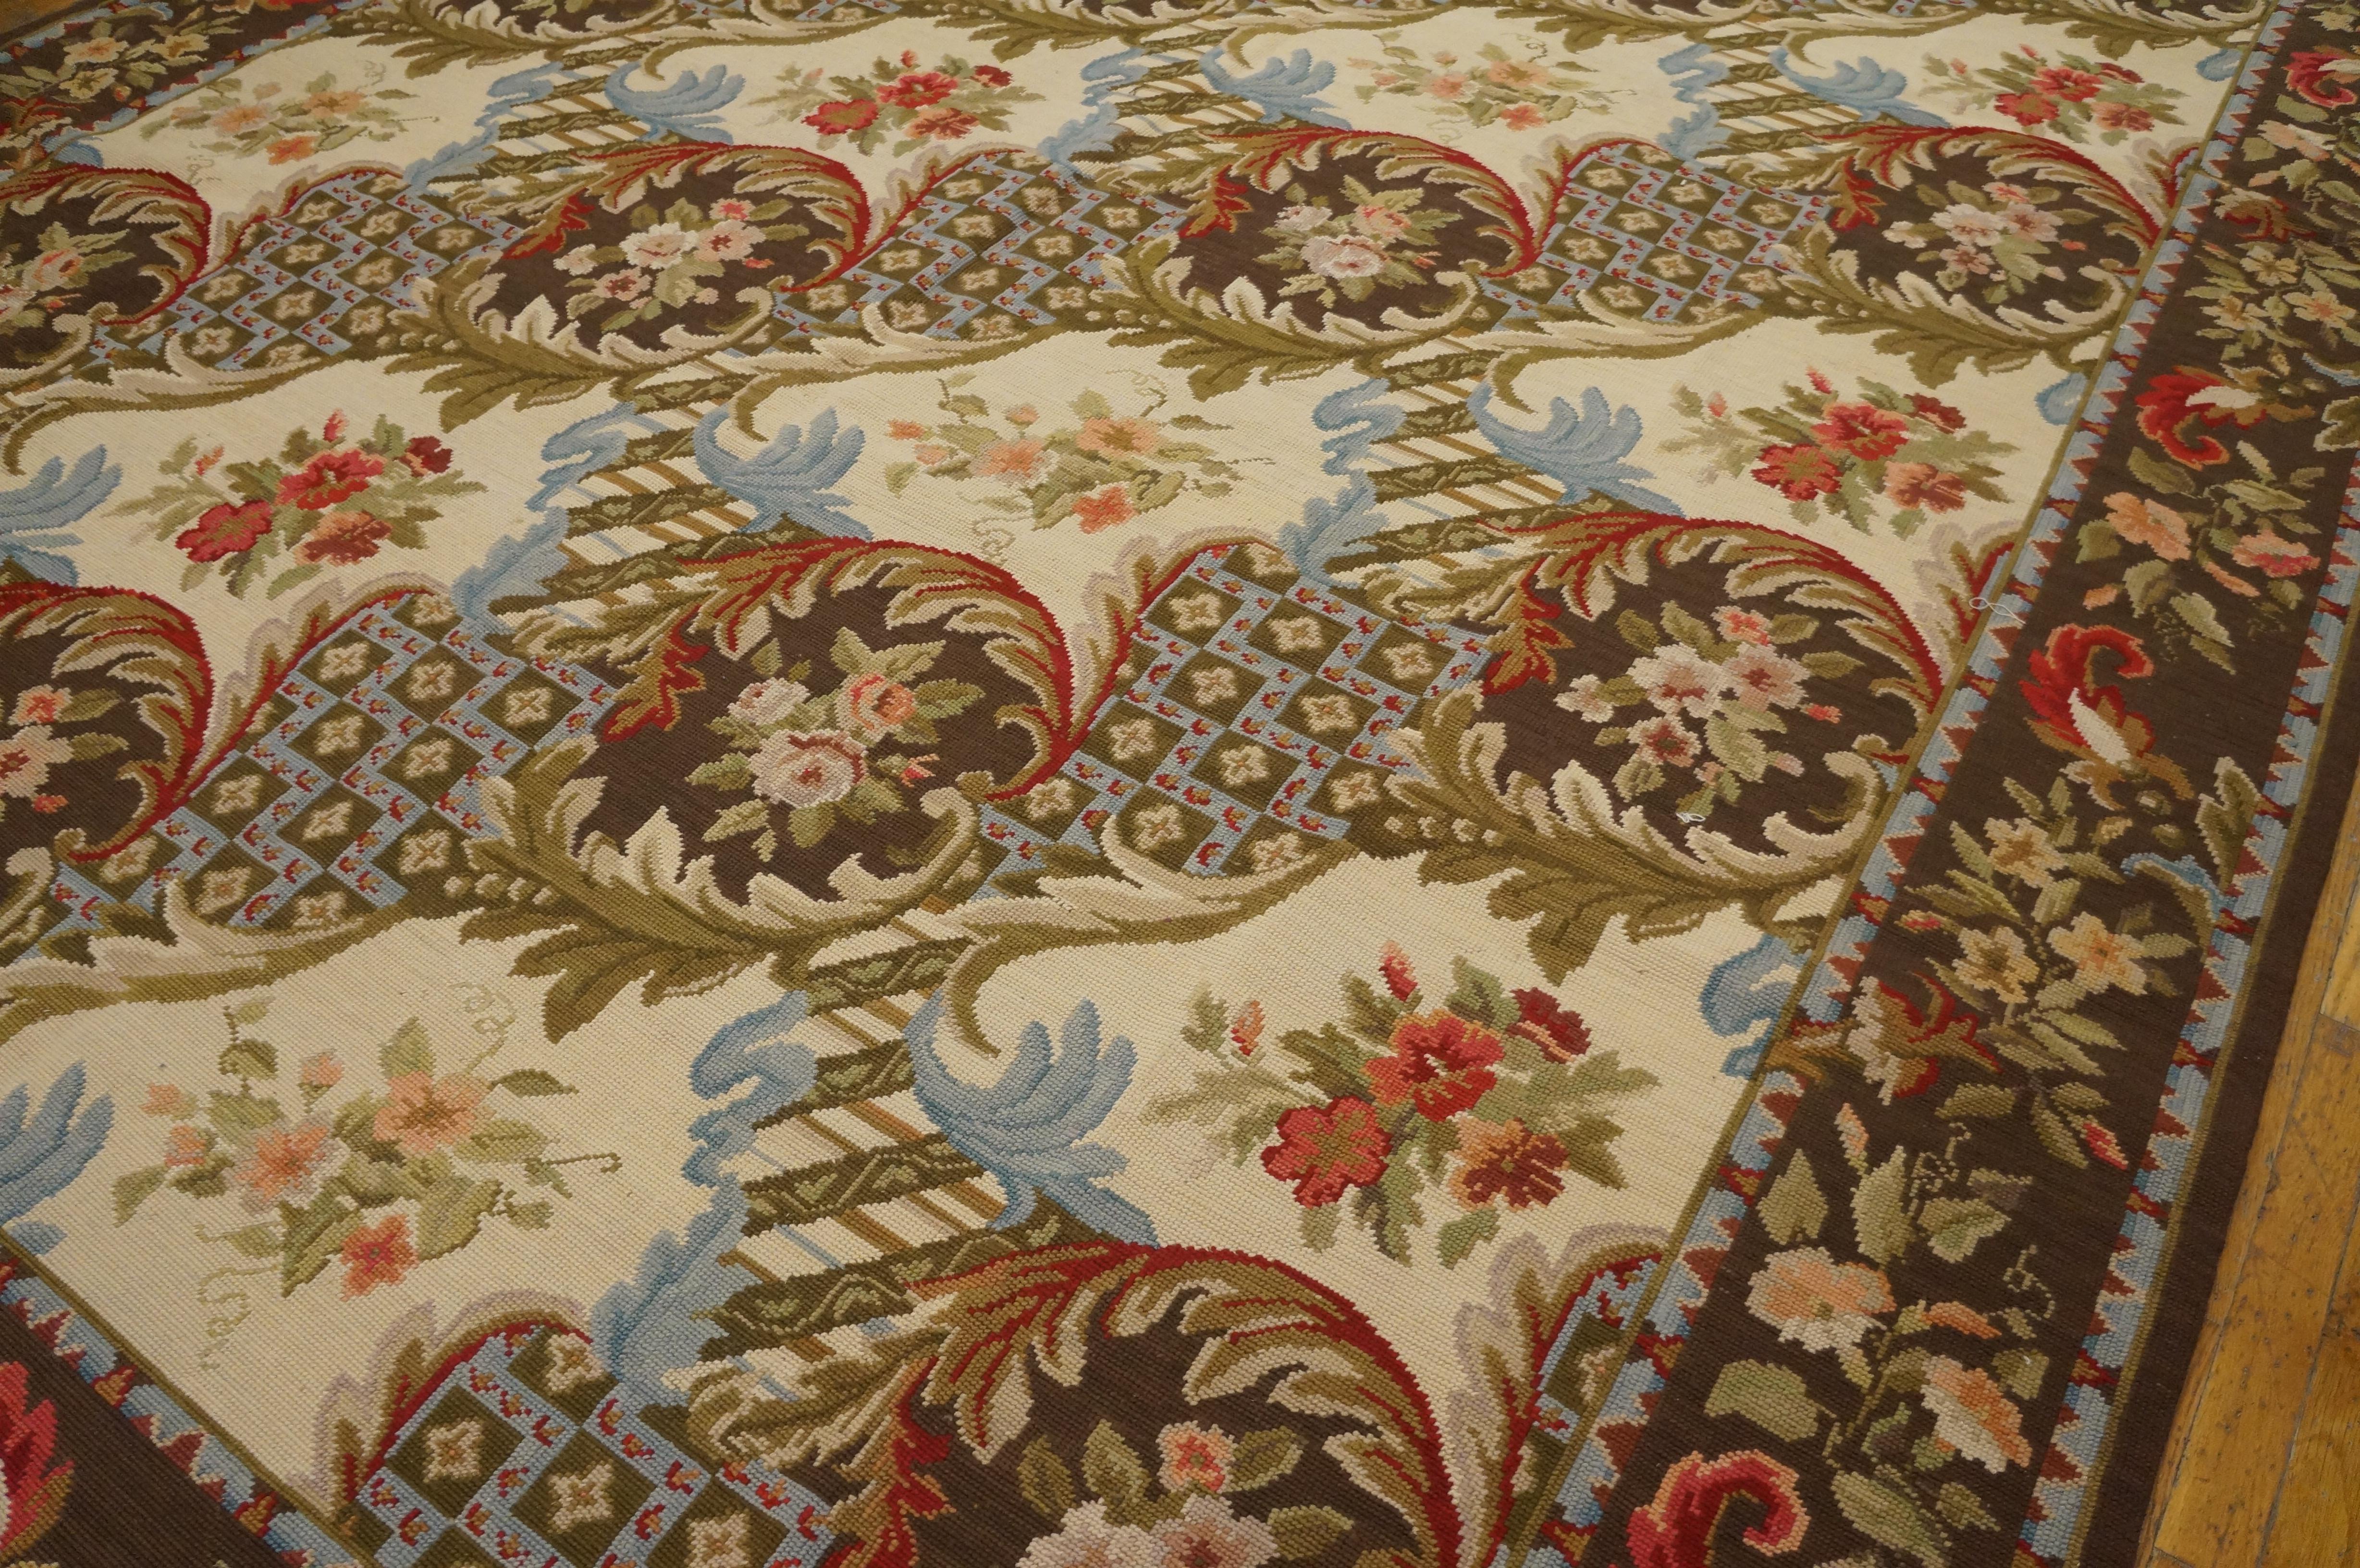 Contemporary Needlepoint Flat Weave Carpet (9' x 12' - 274 x 365) In Excellent Condition For Sale In New York, NY